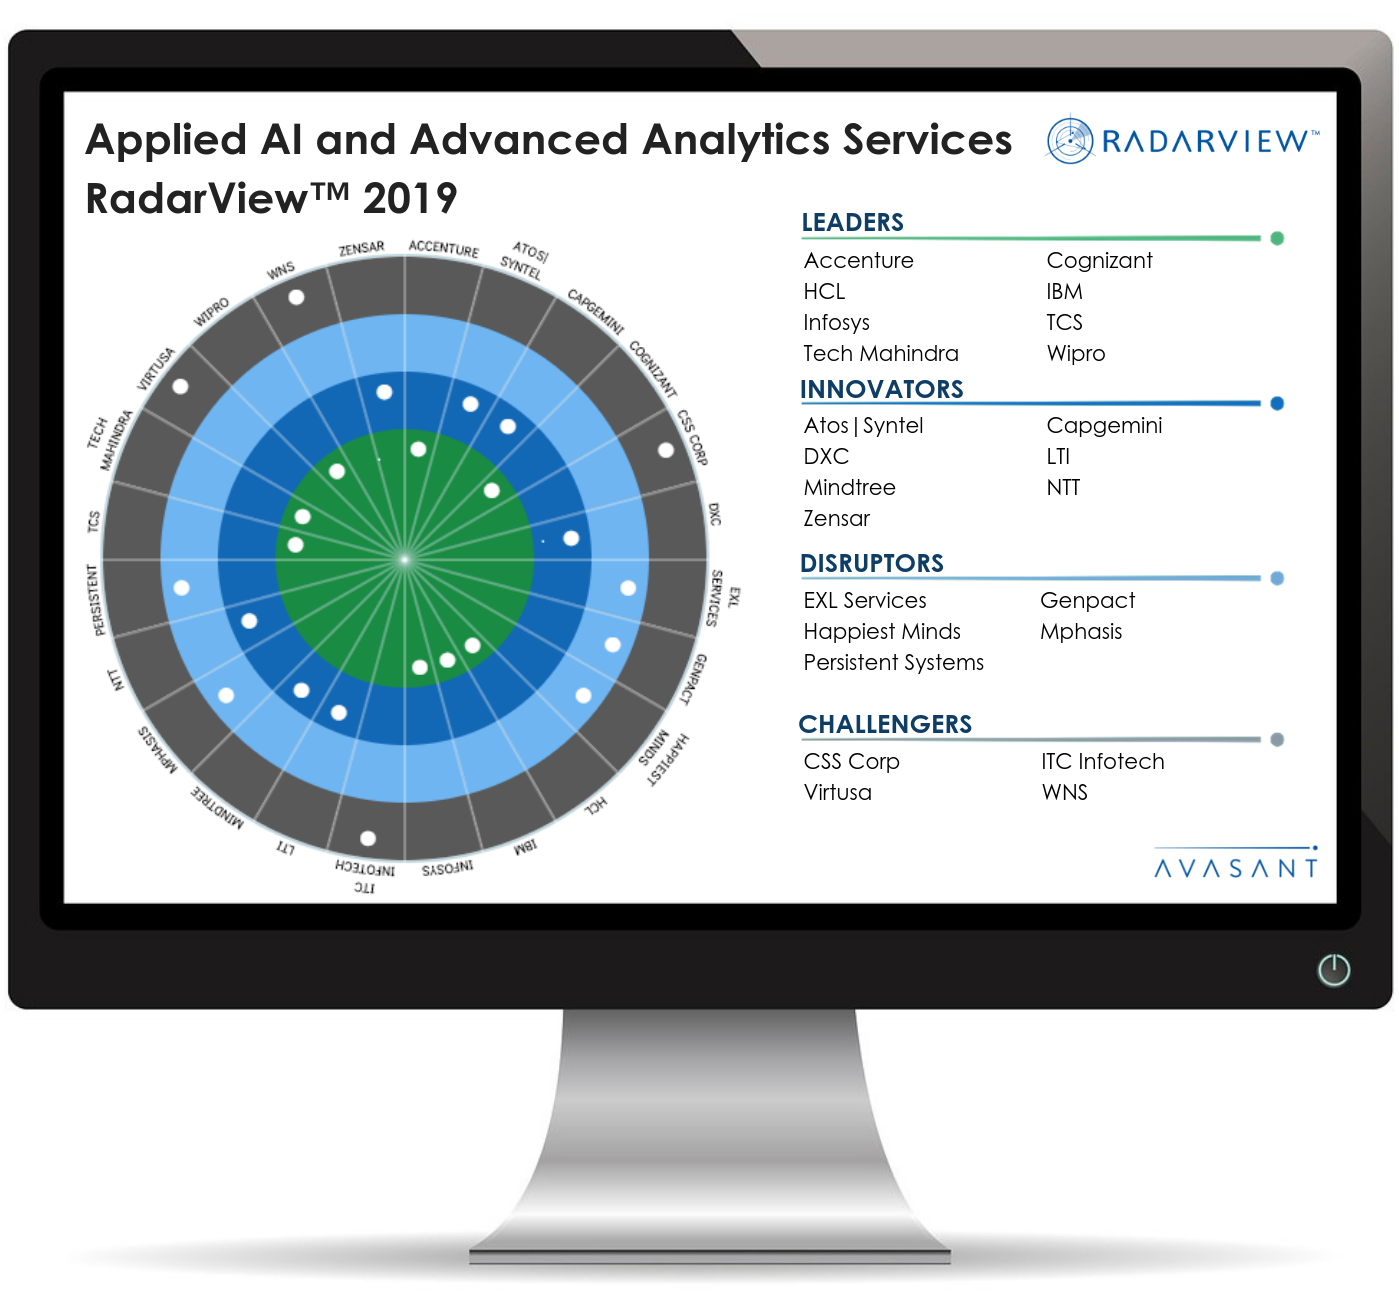 Copy of Ai and Applied Analytics full 1 - Applied AI and Advanced Analytics 2019 DXC RadarView™ Profile